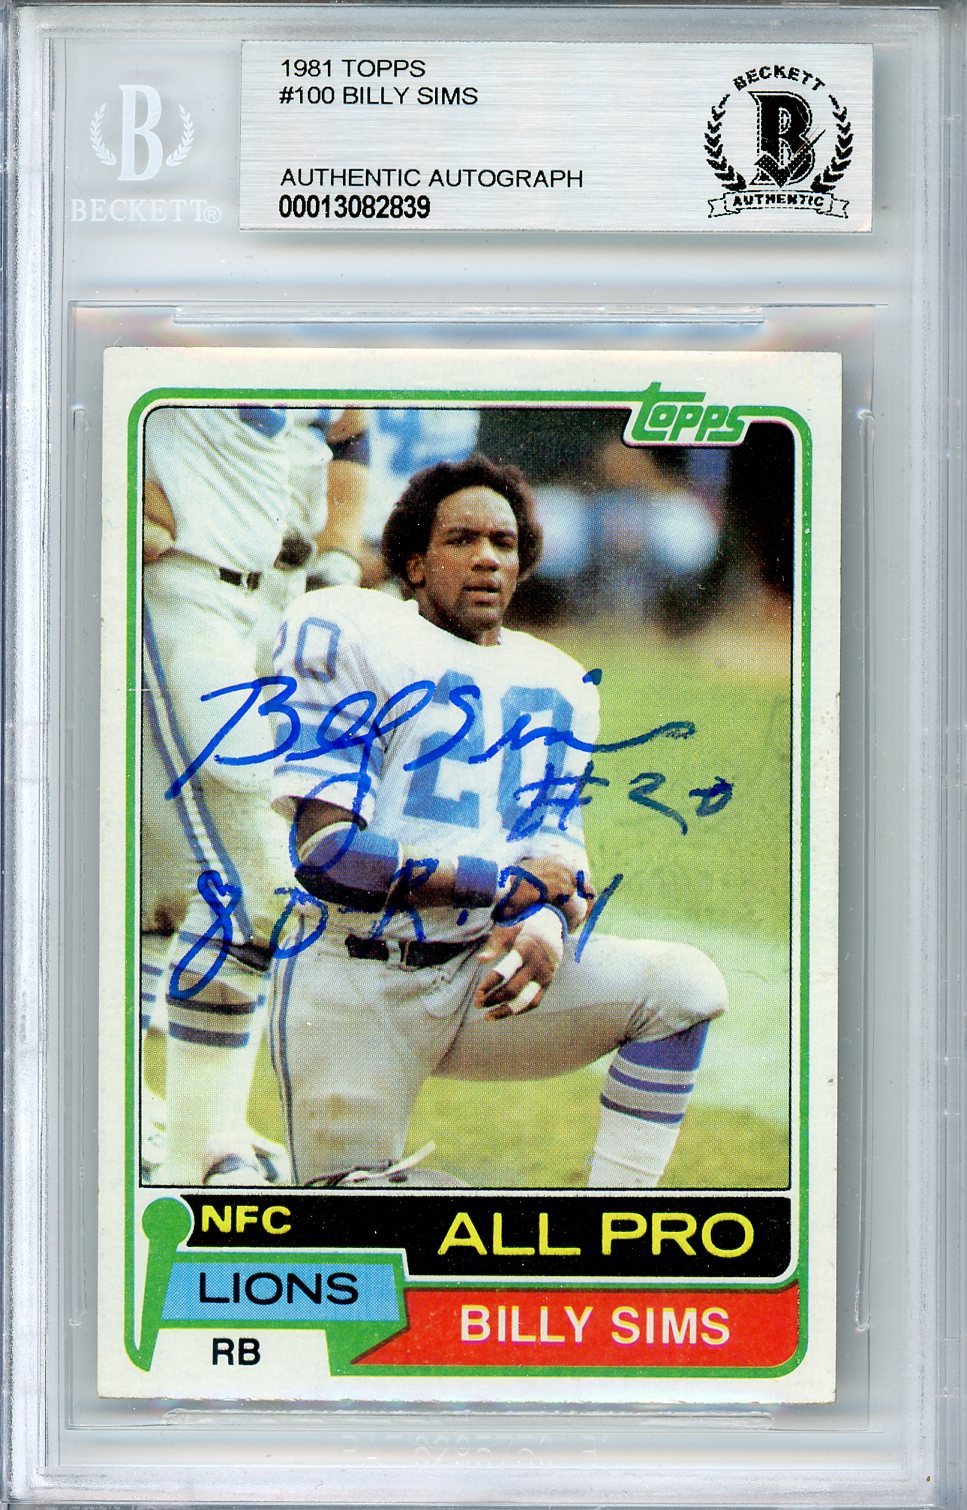 1981 TOPPS BILLY SIMS AUTO ROOKIE RC #100 BECKETT BAS (839)